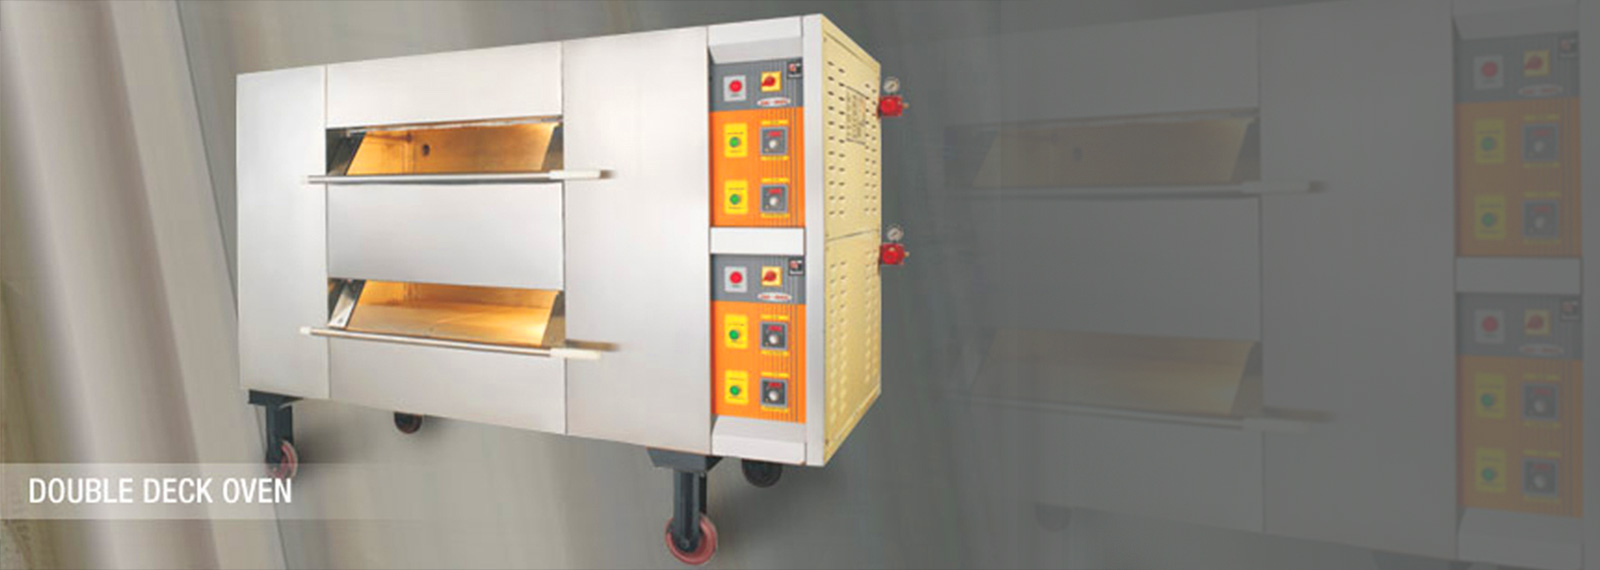 Bakery Oven Manufacturers in Bangalore